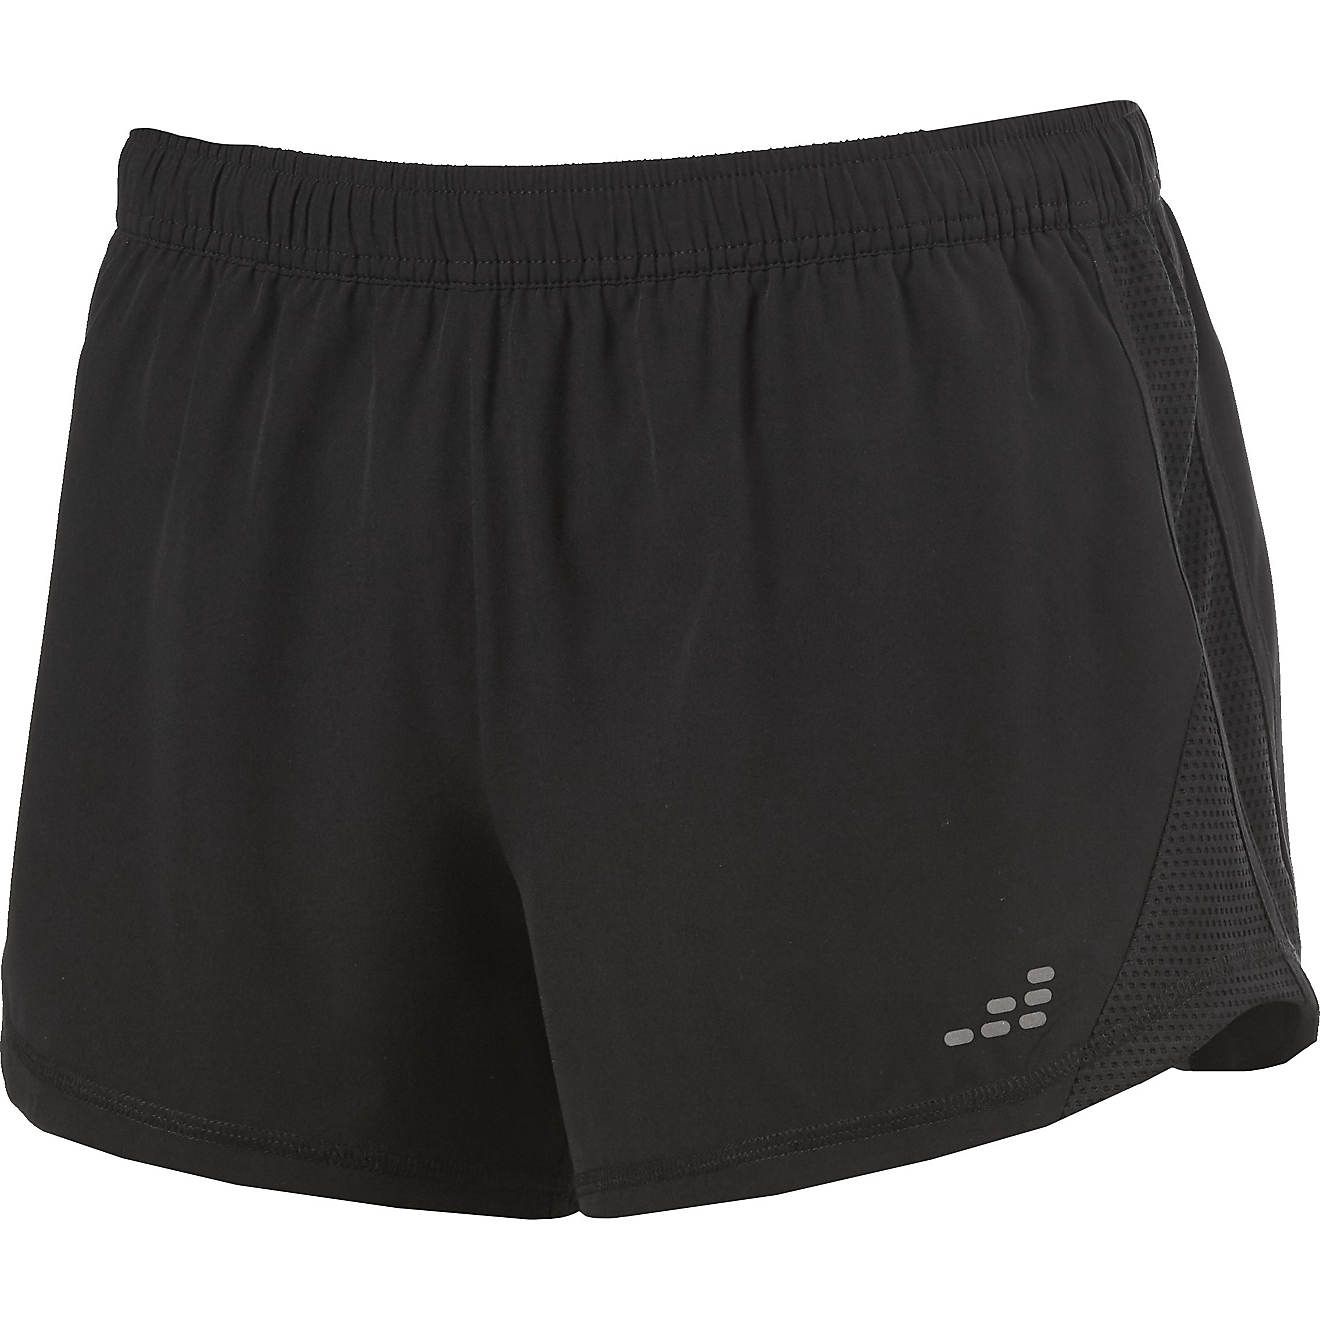 BCG Women's Mesh Panel Running Shorts | Academy Sports + Outdoor Affiliate